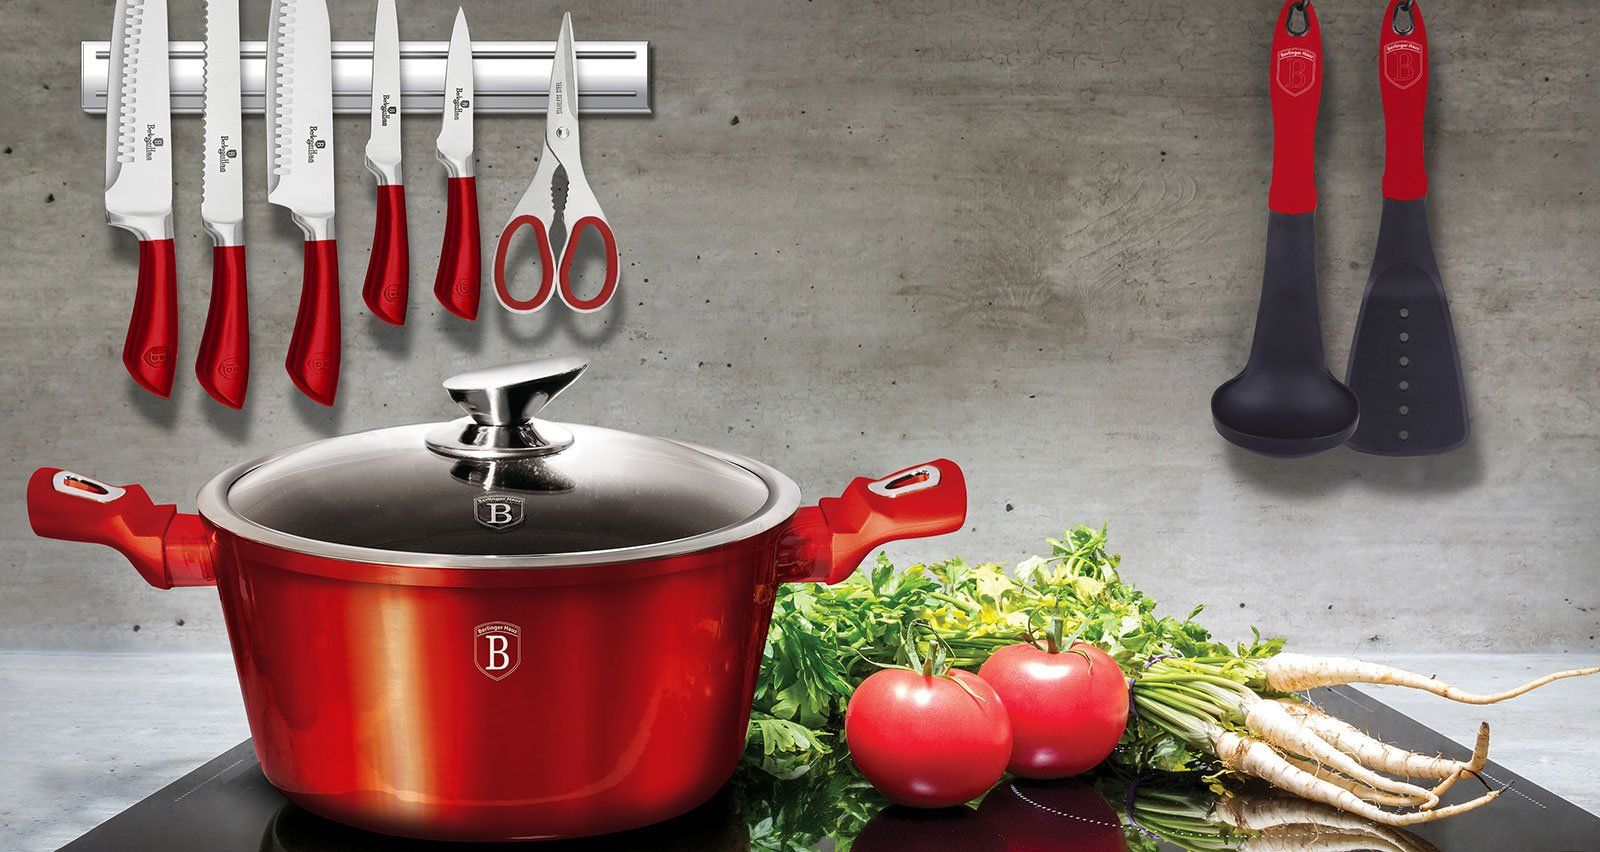 HOW TO MAINTAIN YOUR KITCHEN COOKWARE FOR THE LONG HAUL